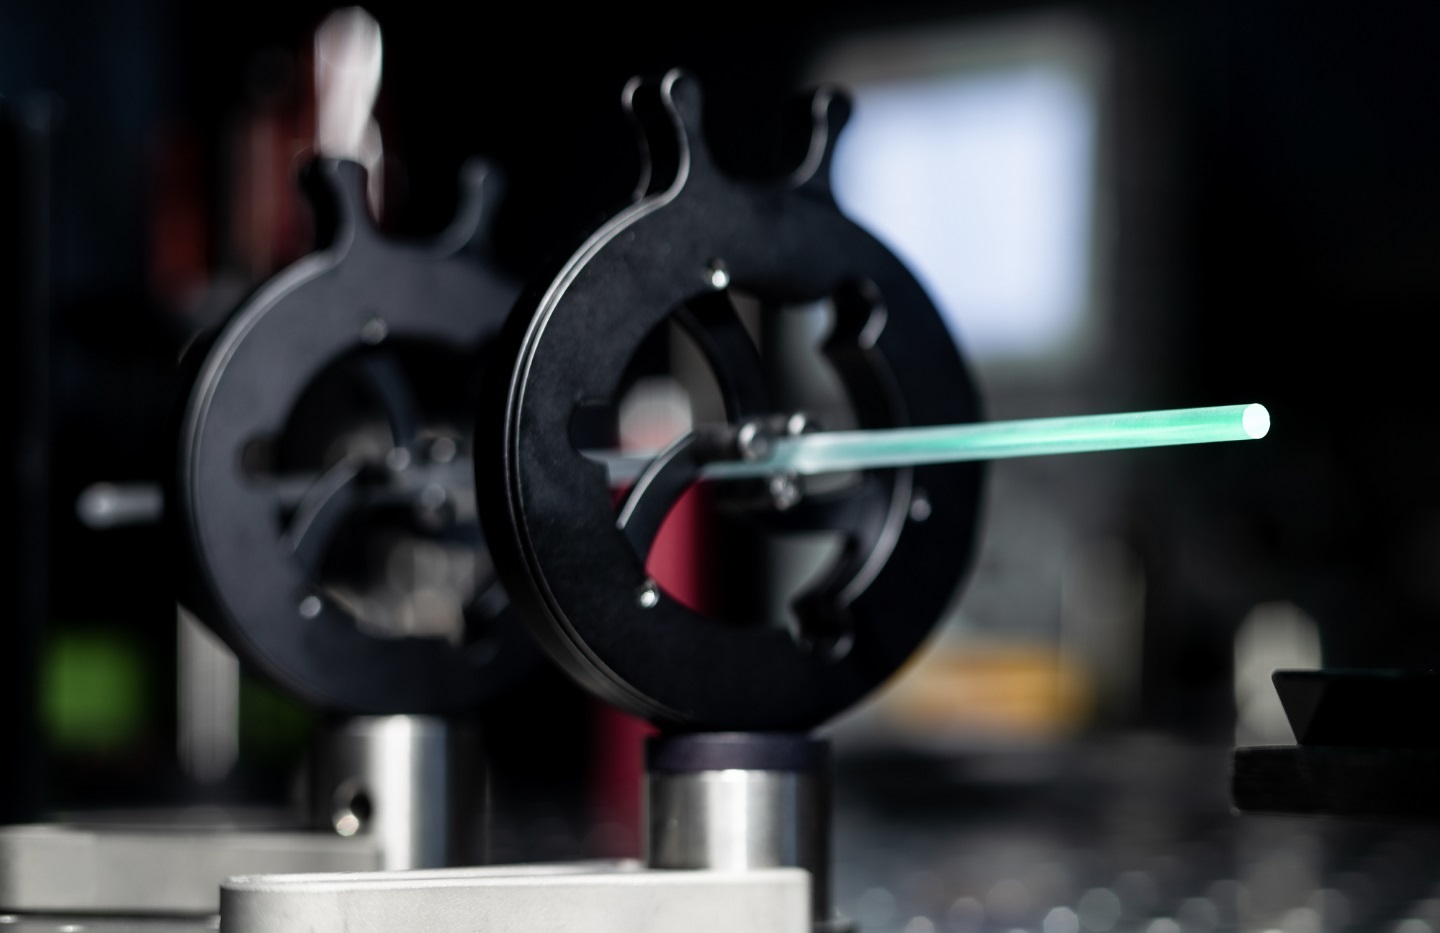 ytterbium-doped glass rod excited by laser